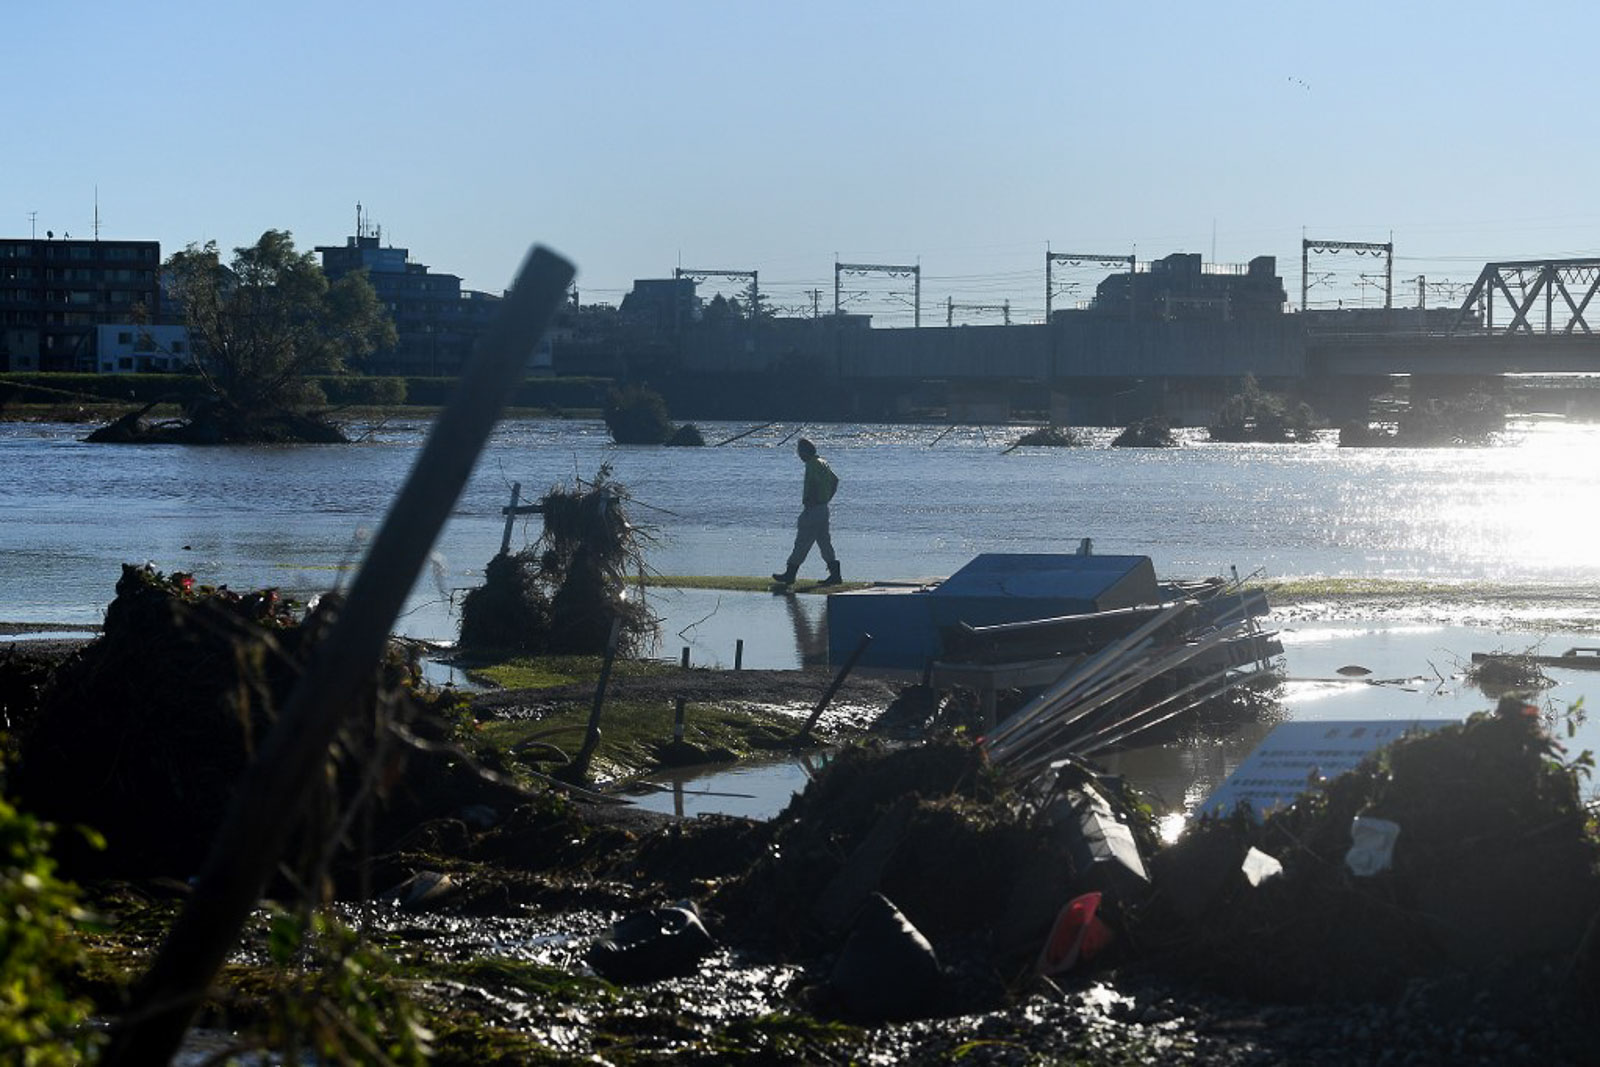 A man walks past debris swept downstream from an overflowing Tamagawa river in the aftermath of Typhoon Hagibis, in Kawasaki on October 13, 2019. Photo by Franck Fife/AFP 